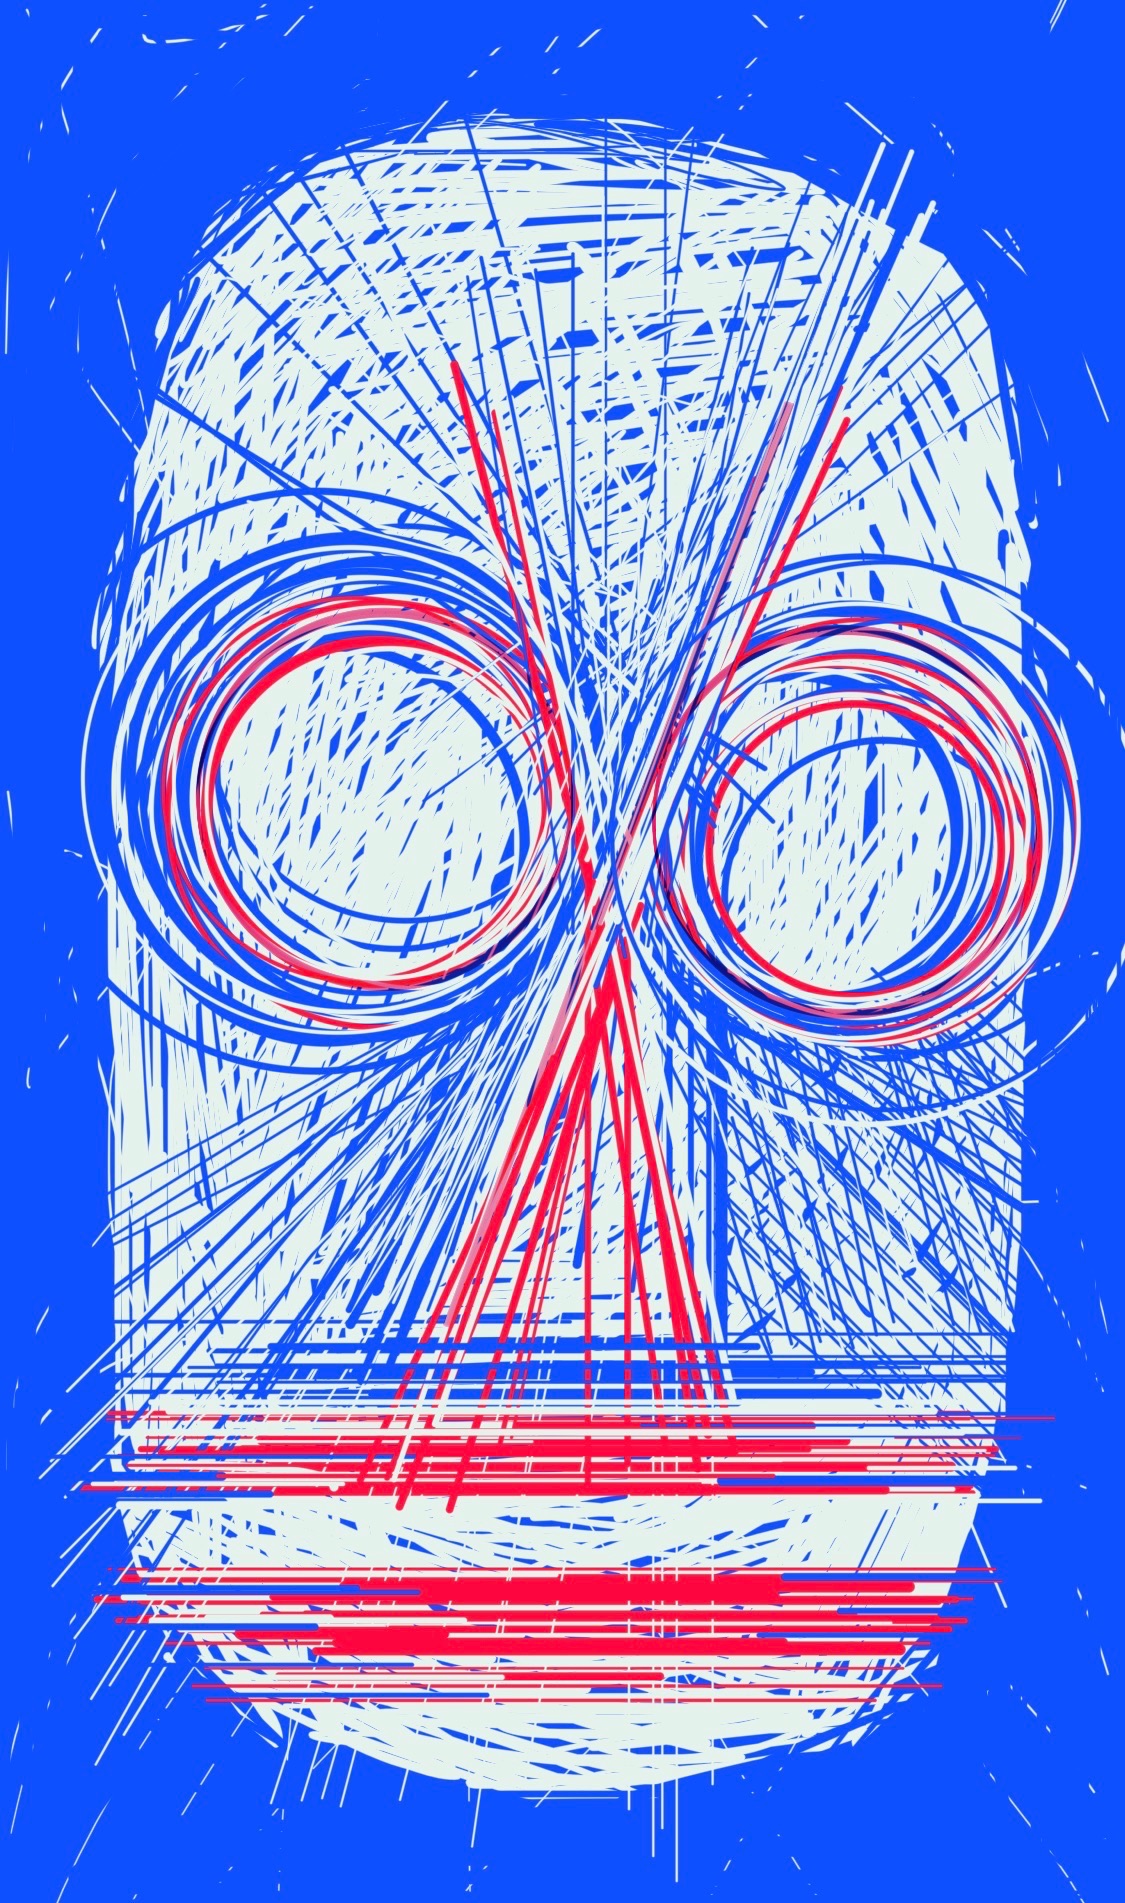 An abstract, sharply geometrical sketch of a face